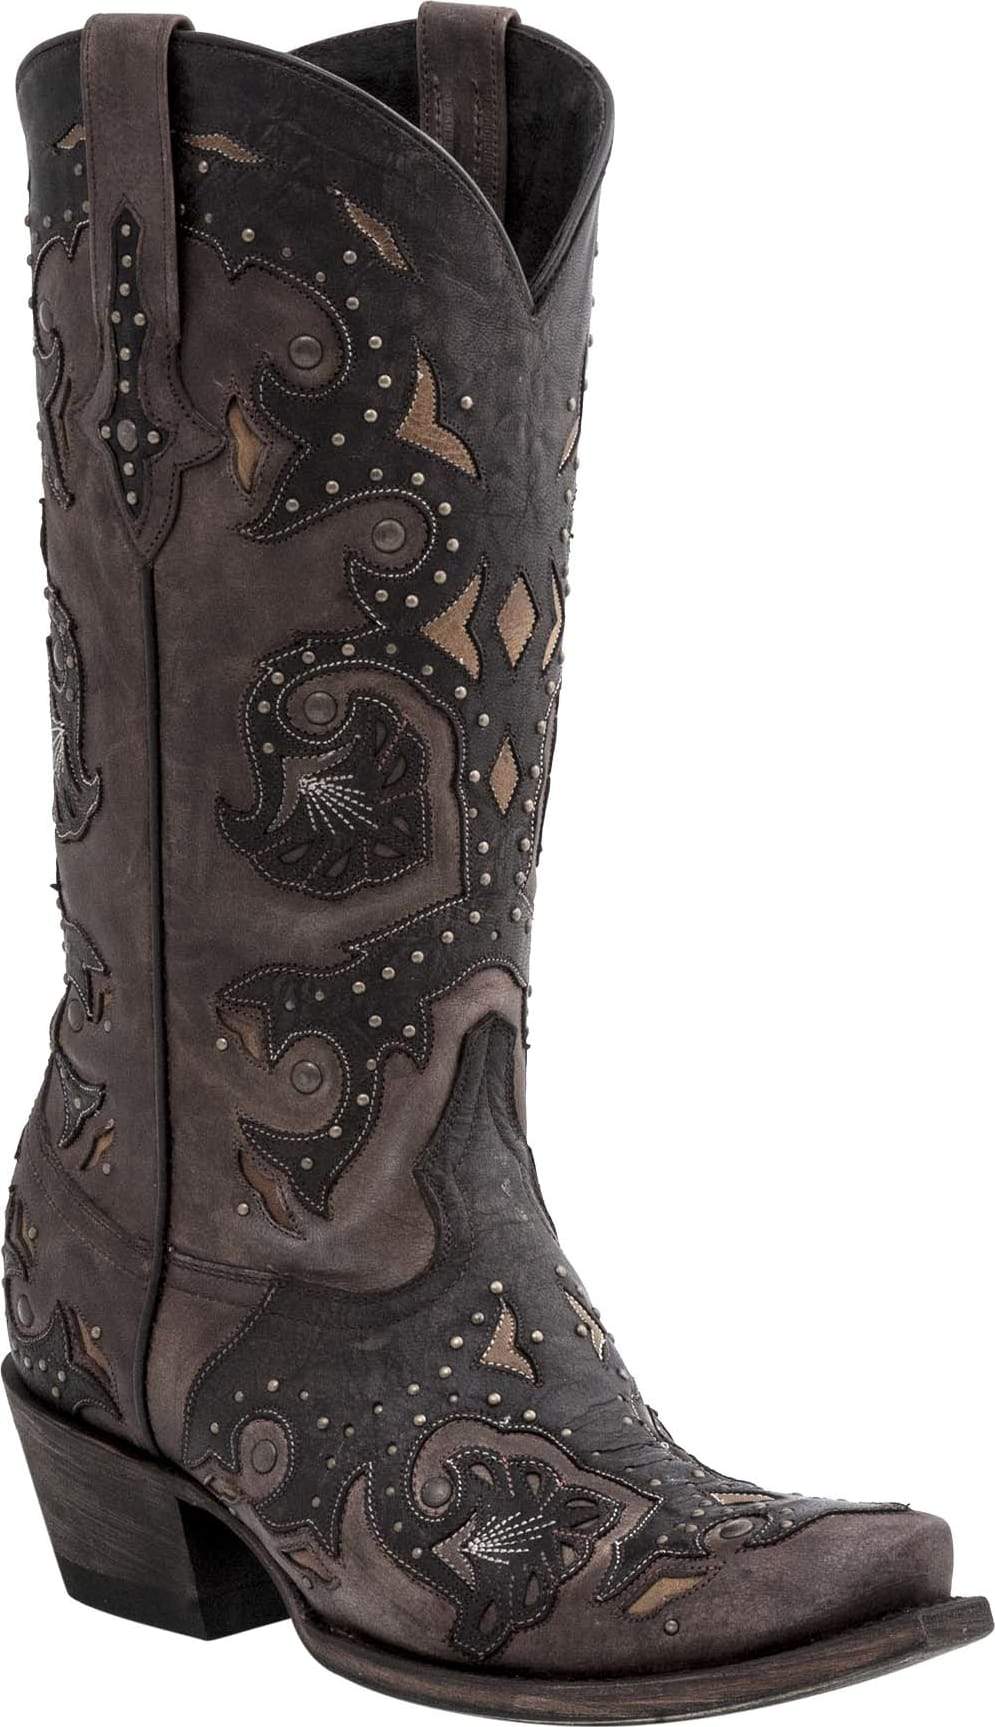 M5015.s54 Lucchese Bootmaker Women's FIONA Scarlette Stud Snip Toe Boot